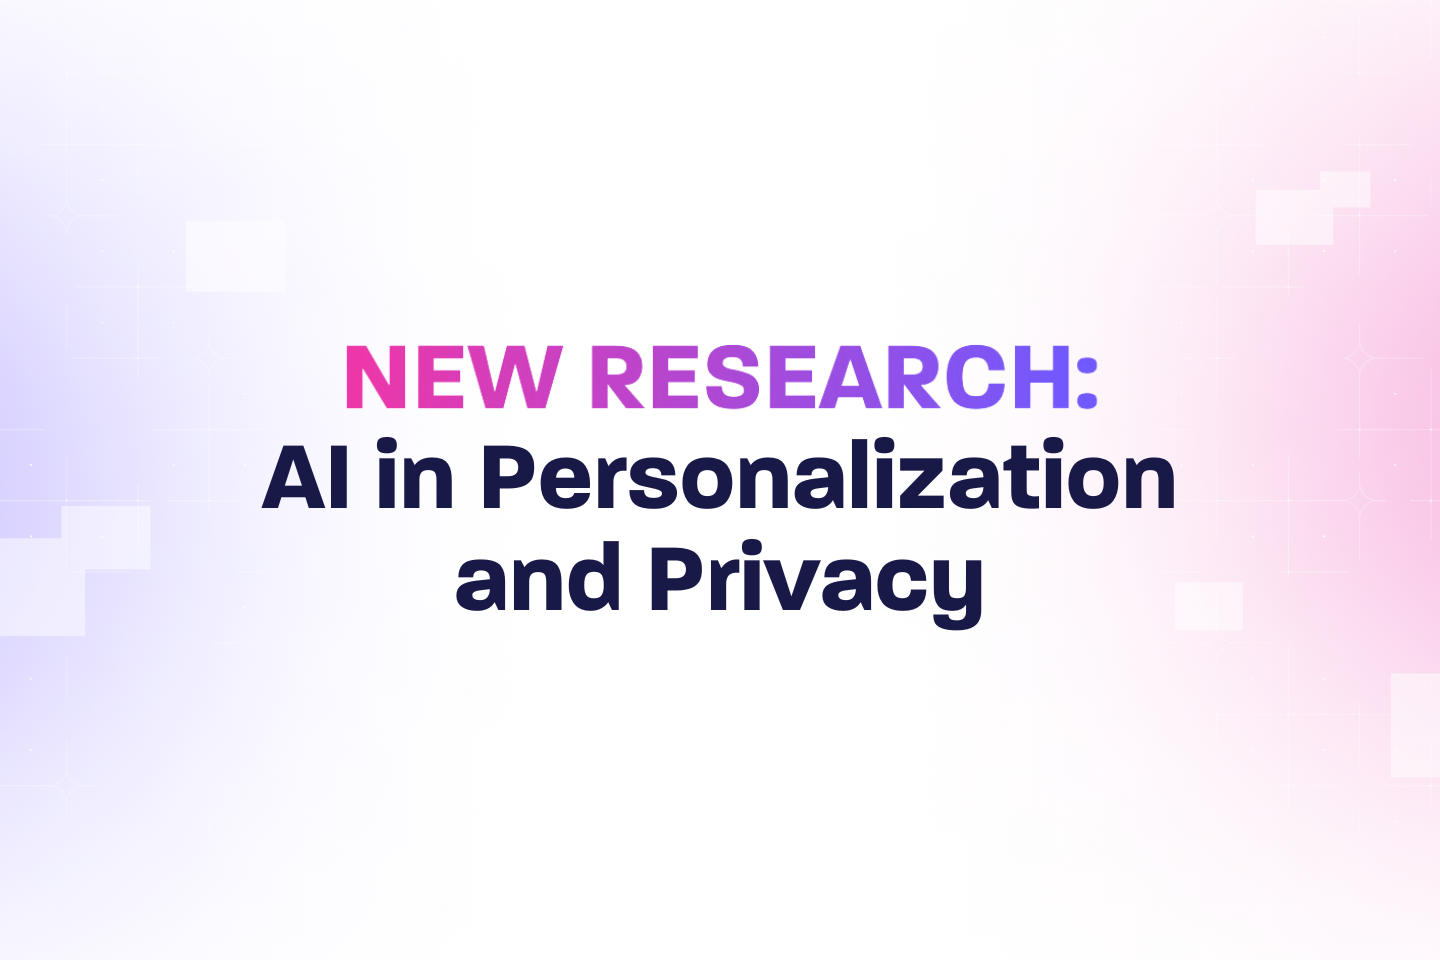 AI in Personalization and Privacy Newsroom Image